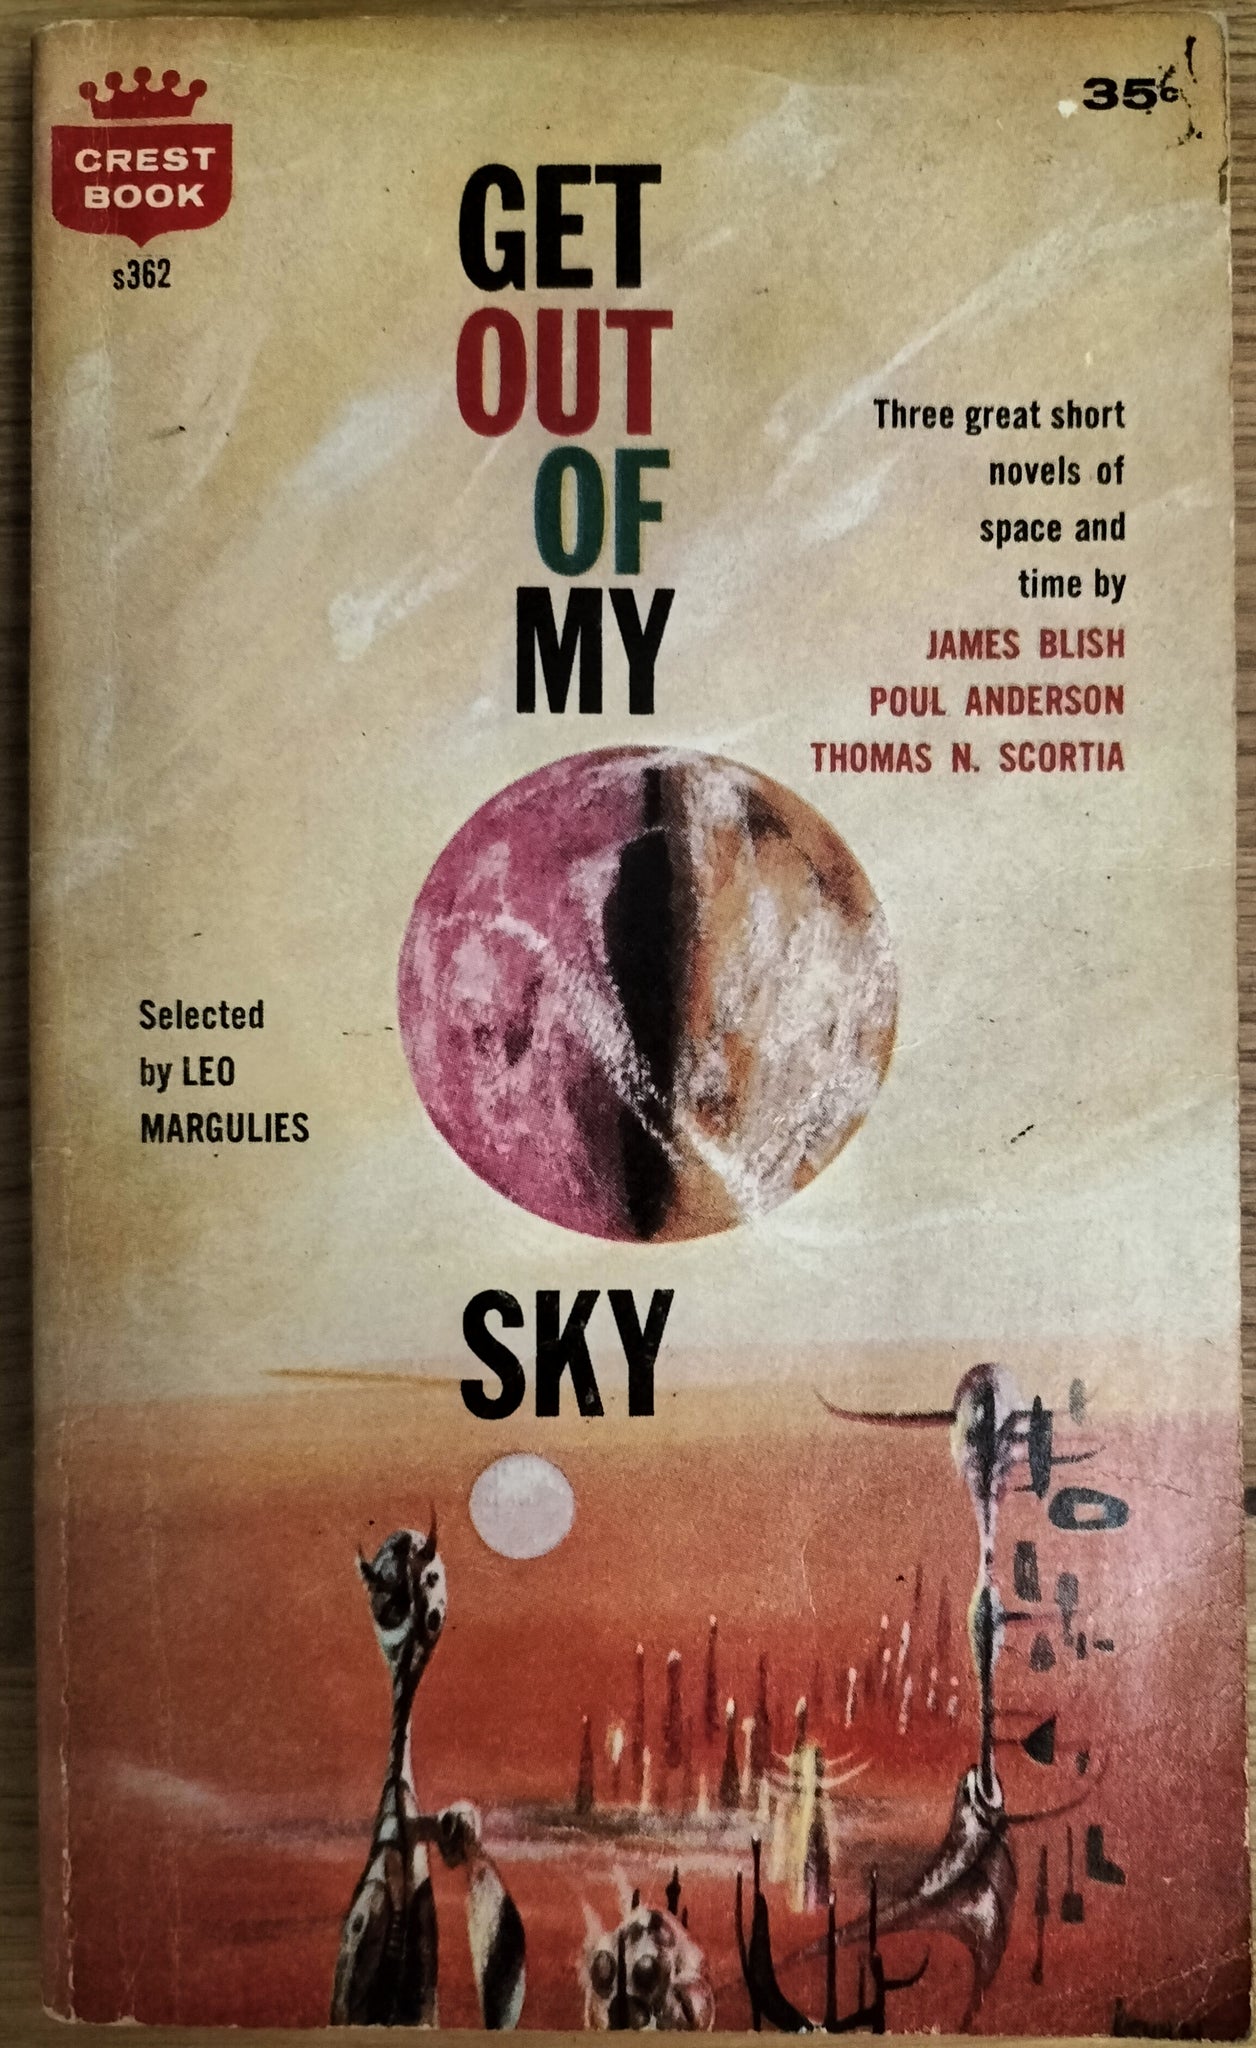 Get Out Of My Sky by James Blish, Poul Anderson and Thomas N. Scortia